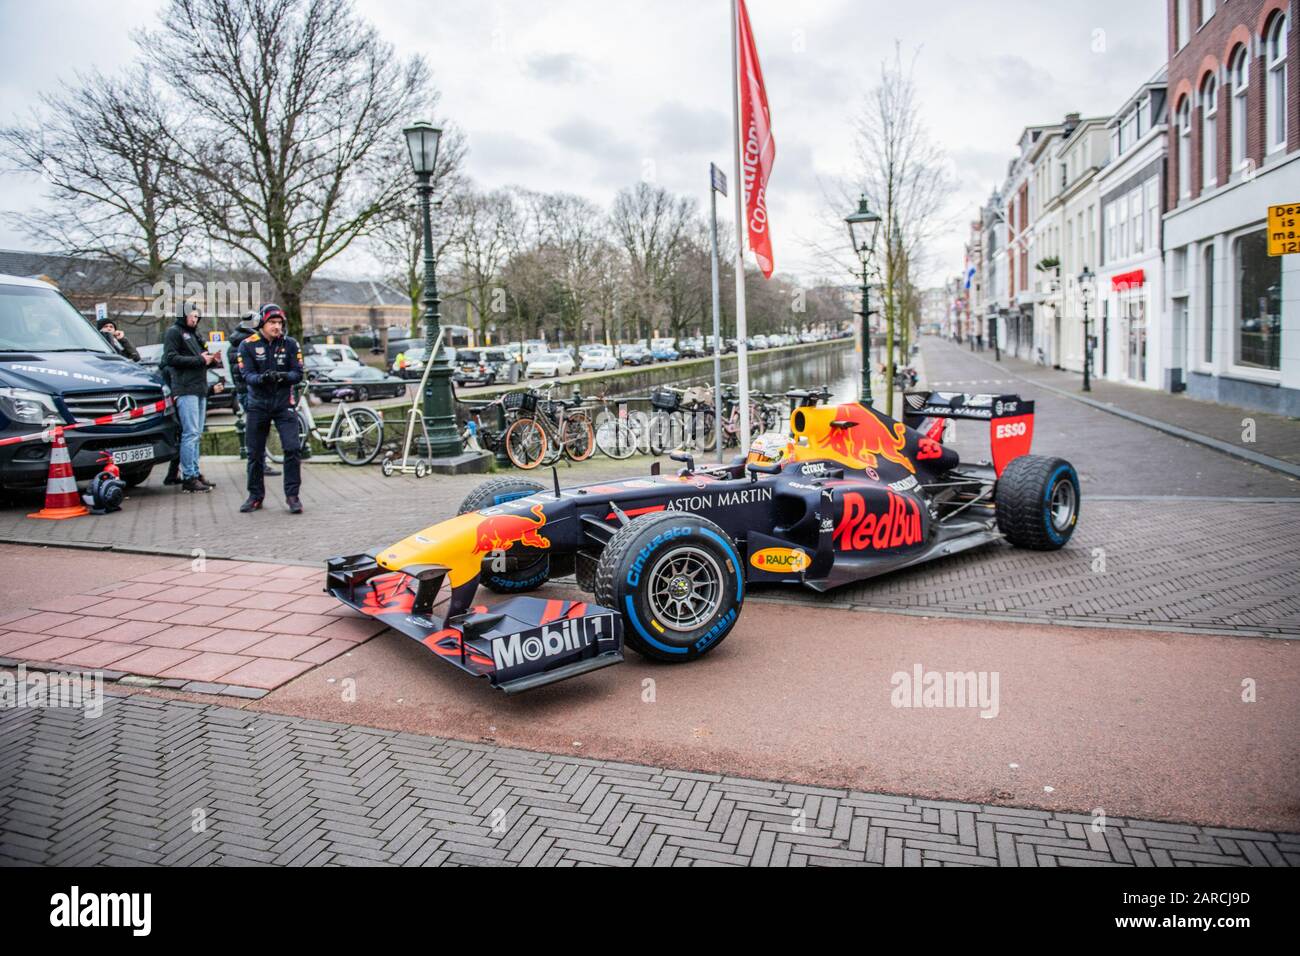 Den Haag, Netherlands. 27th Jan, 2020. DEN HAAG, 27-01-2020, Formula 1 cars  from the Redbull Racing Team in the center of The Hague. Redbull is making  a promovideo for the Formula 1